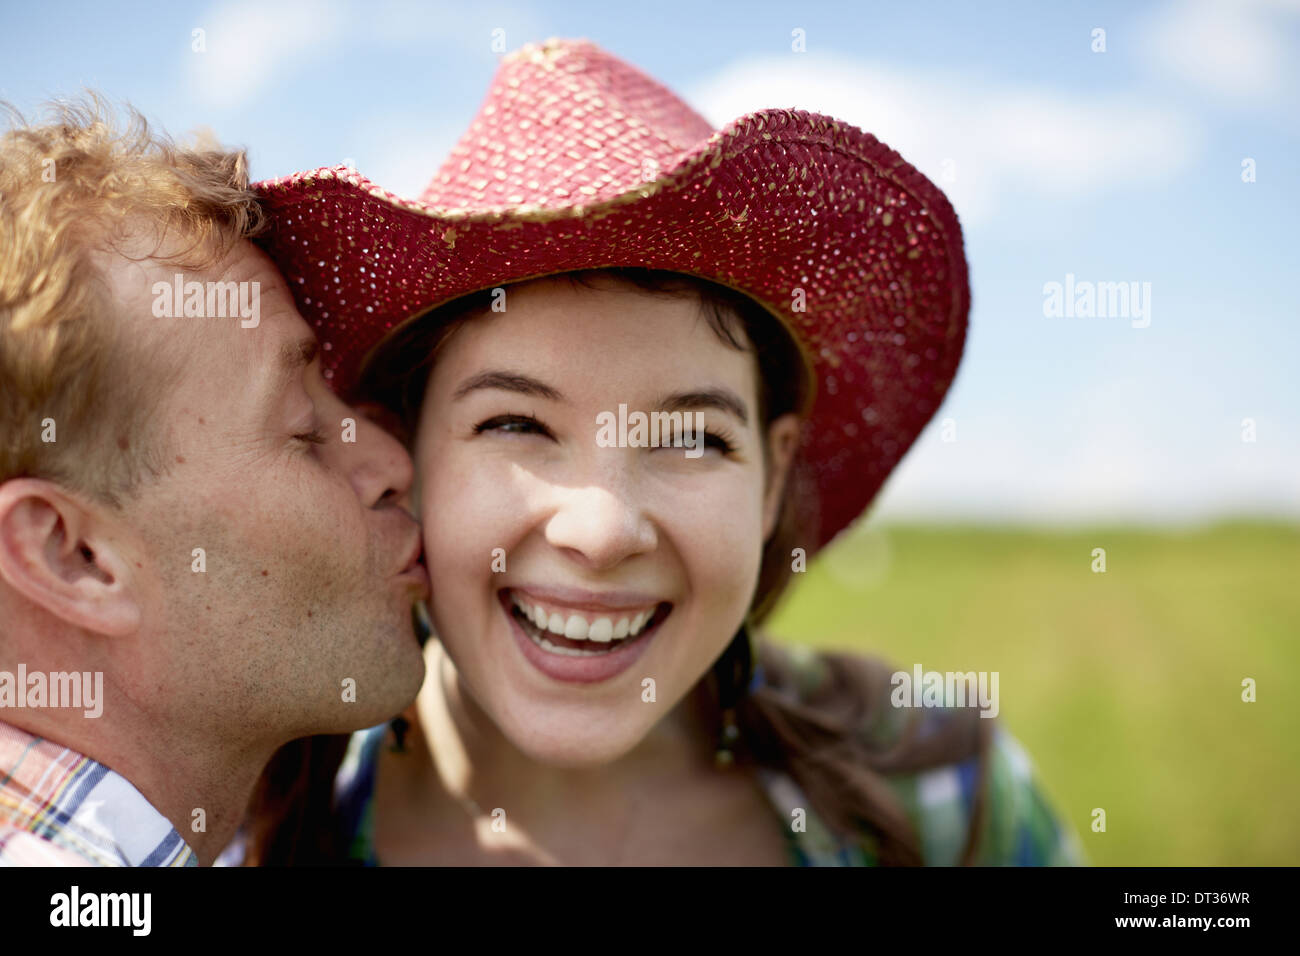 A young woman in a wide-brimmed pink hat being kissed on the cheek by a young man Stock Photo